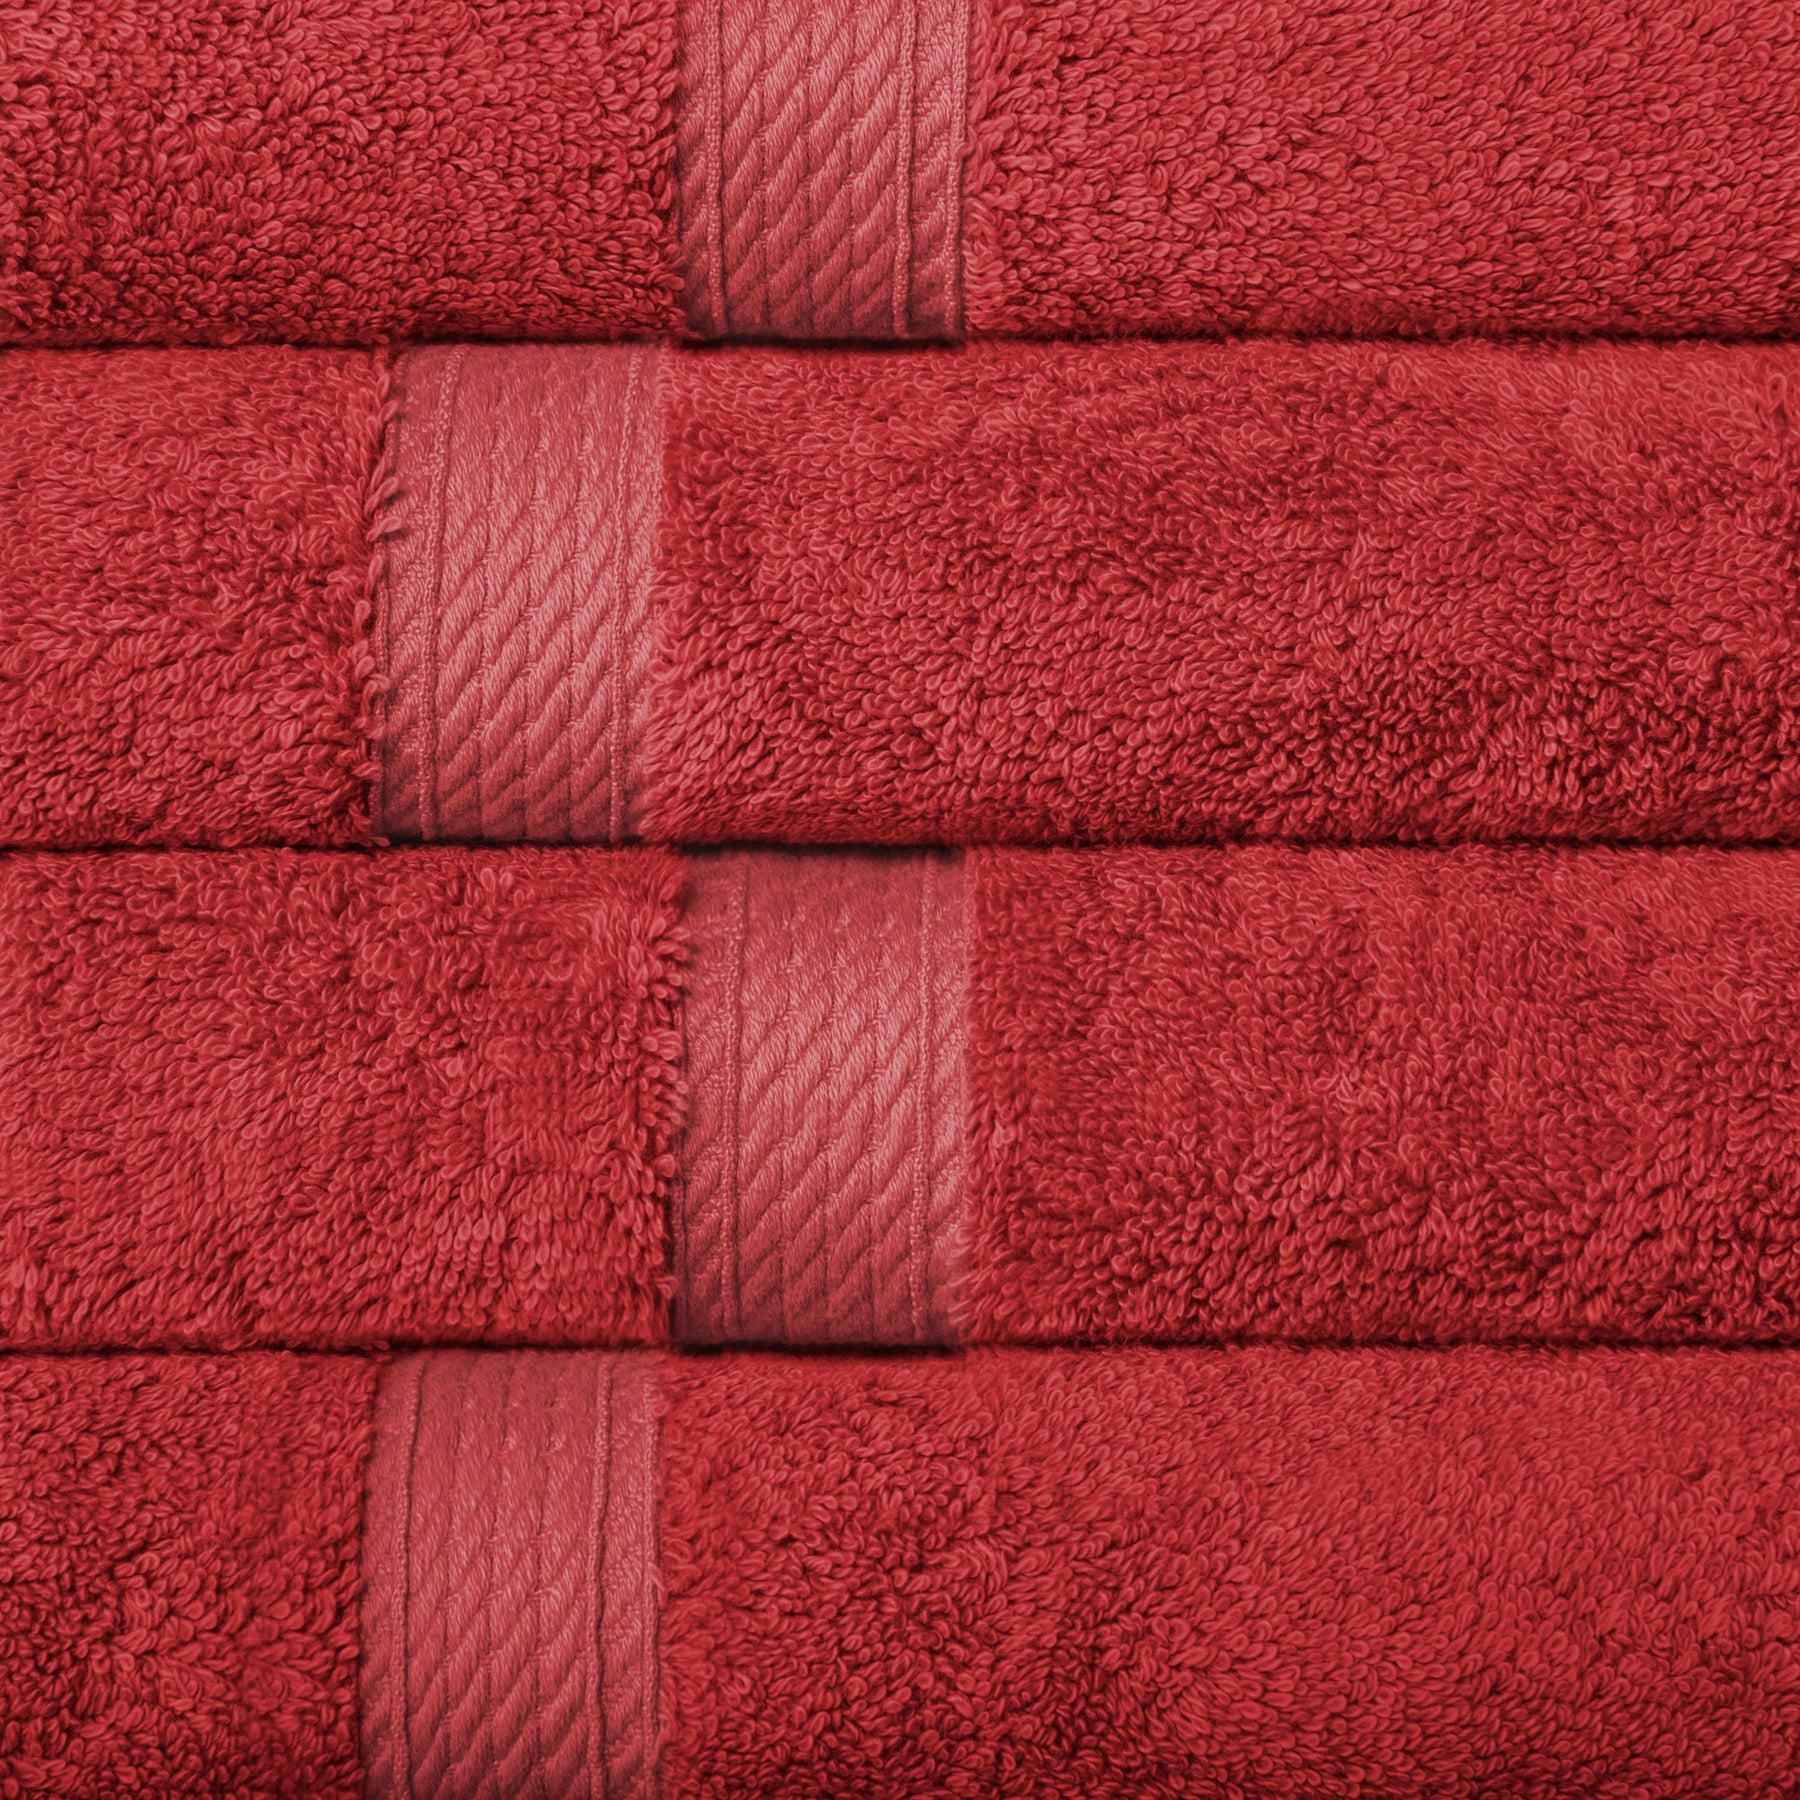 Solid Egyptian Cotton 4 Piece Hand Towel Set - Red